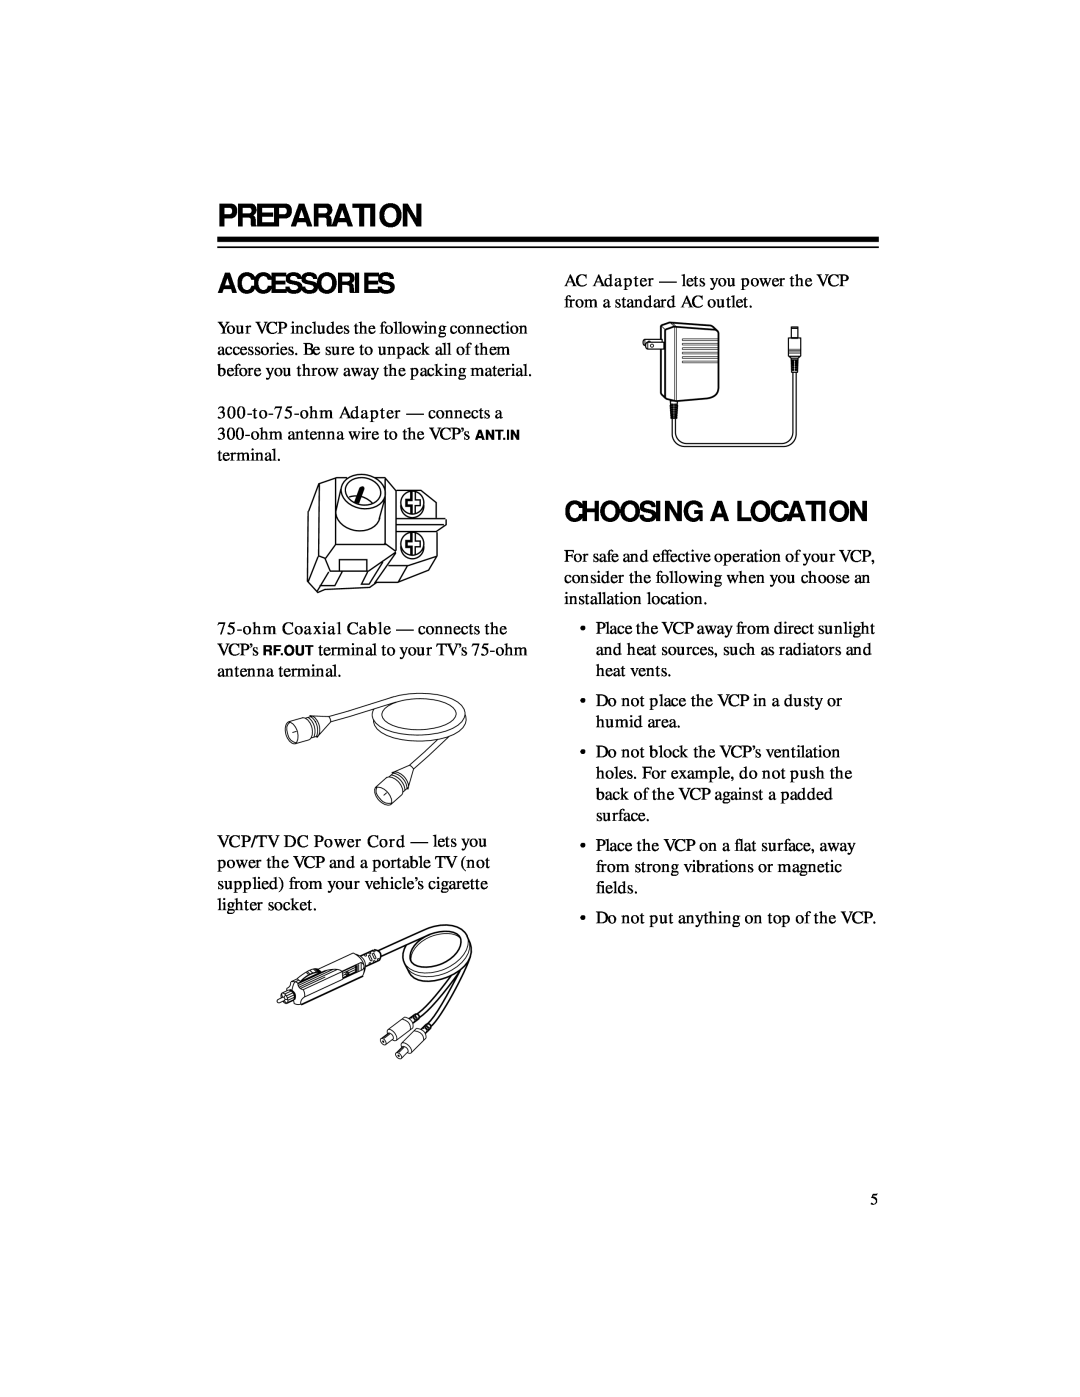 RCA 40, 50 owner manual Preparation, Accessories, Choosing A Location 